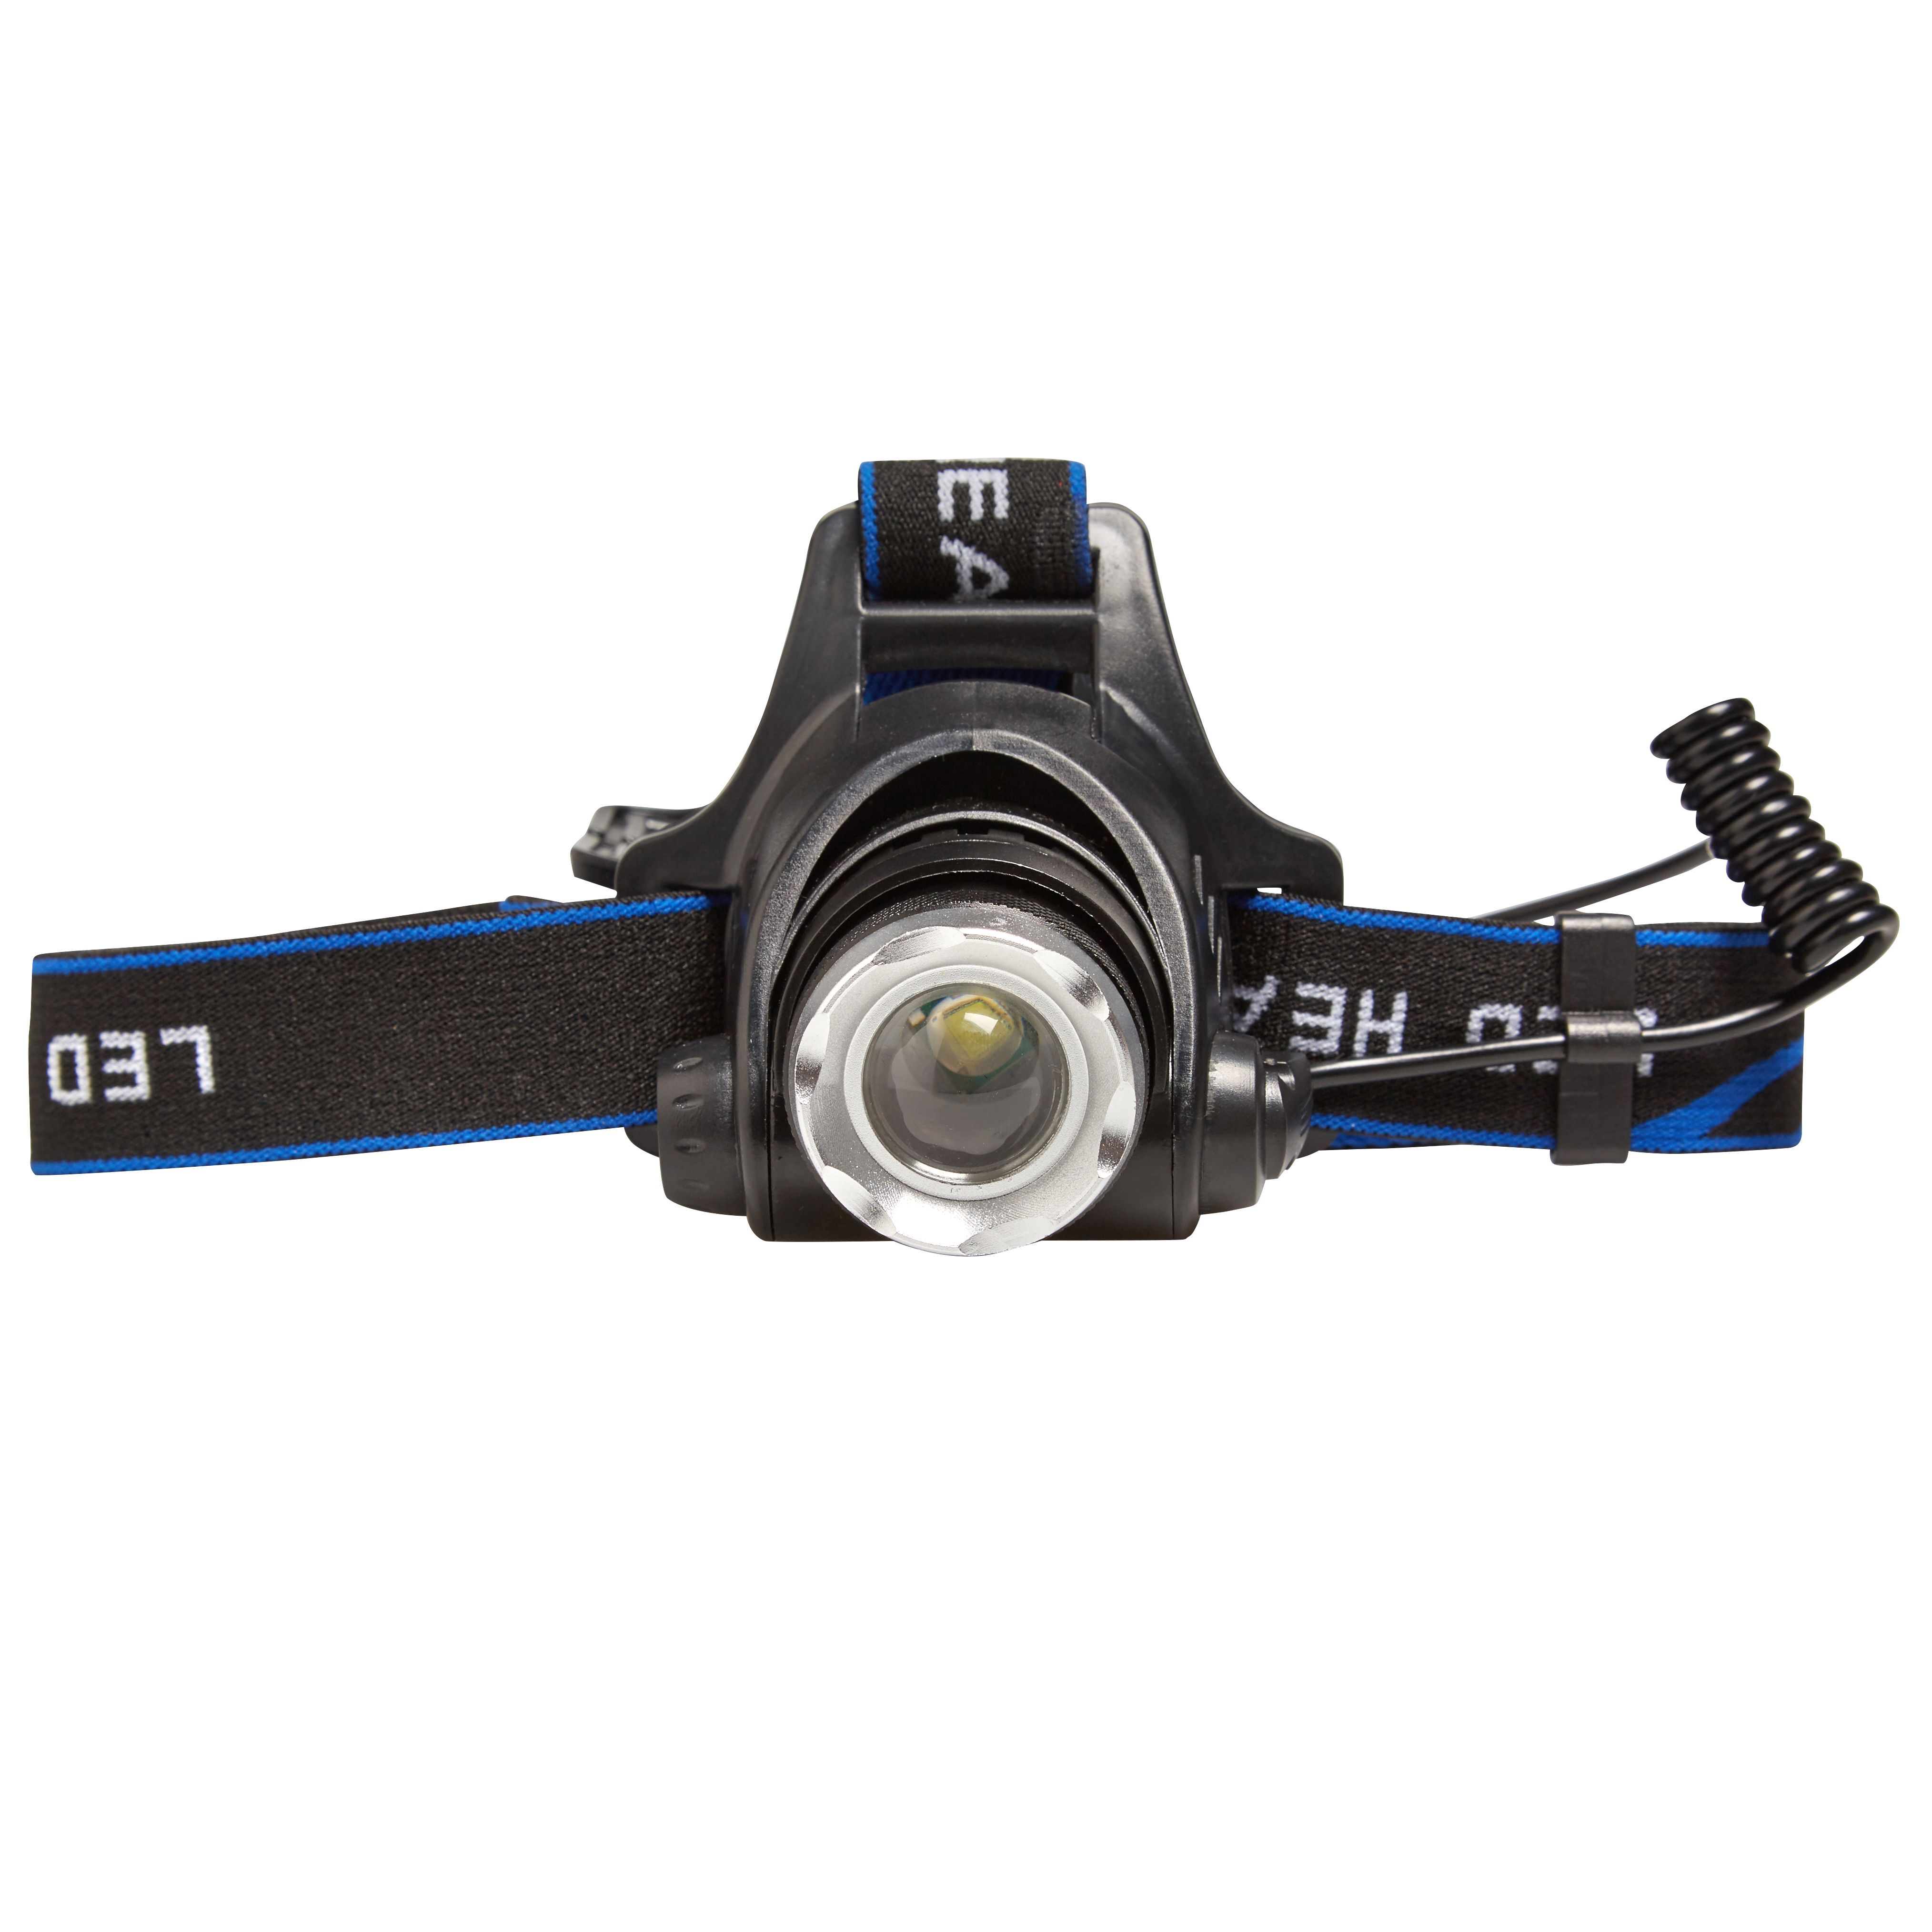 Diall 300lm LED Head light